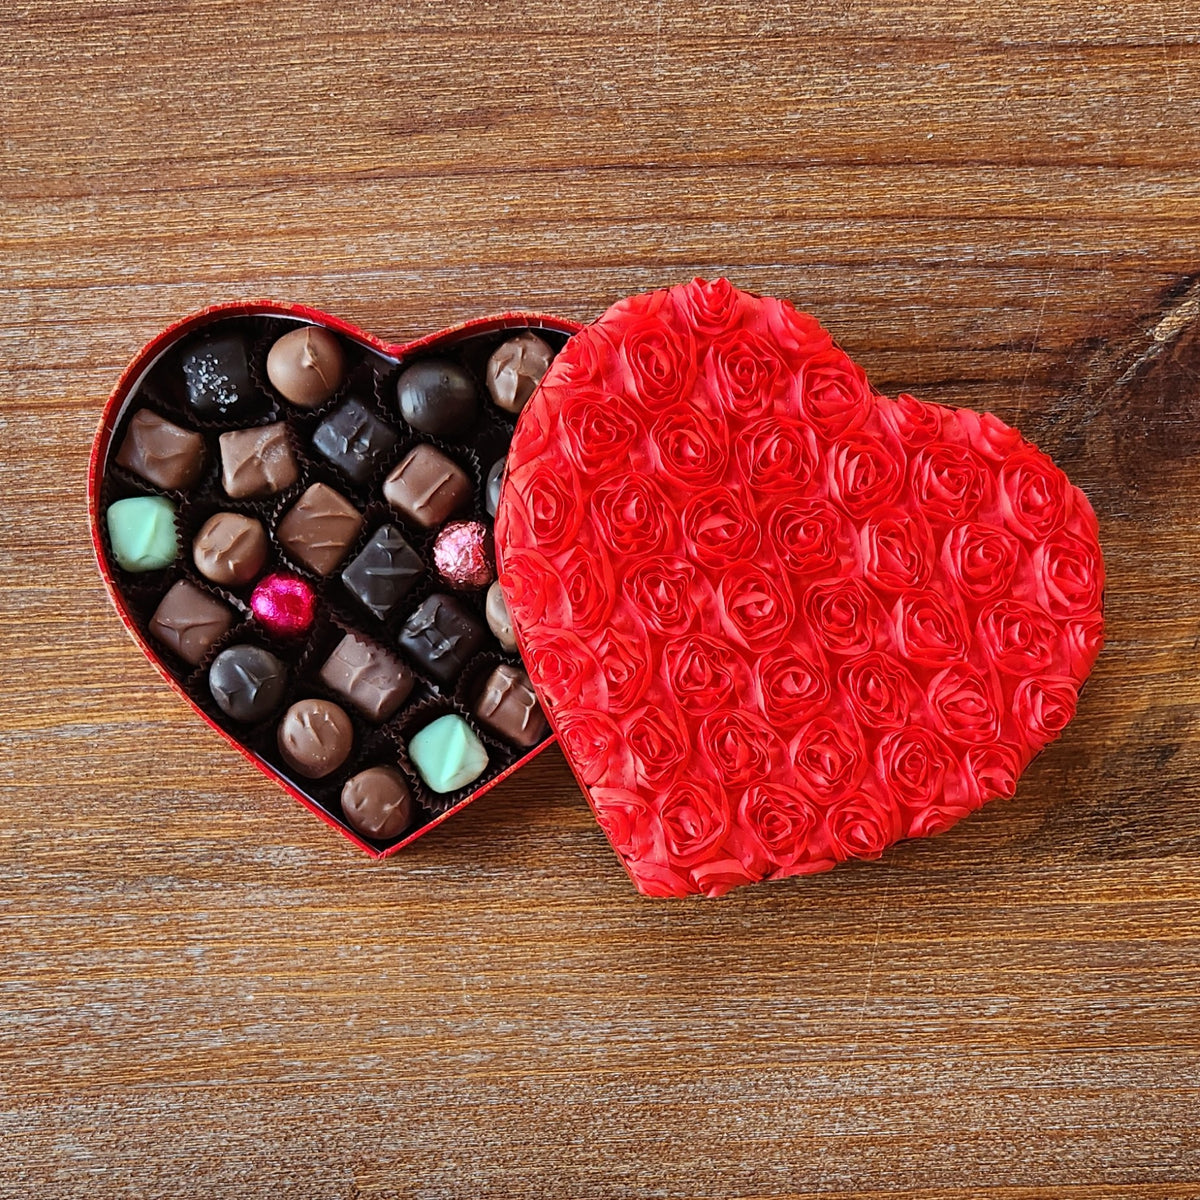 Roses Heart - Assorted Chocolates